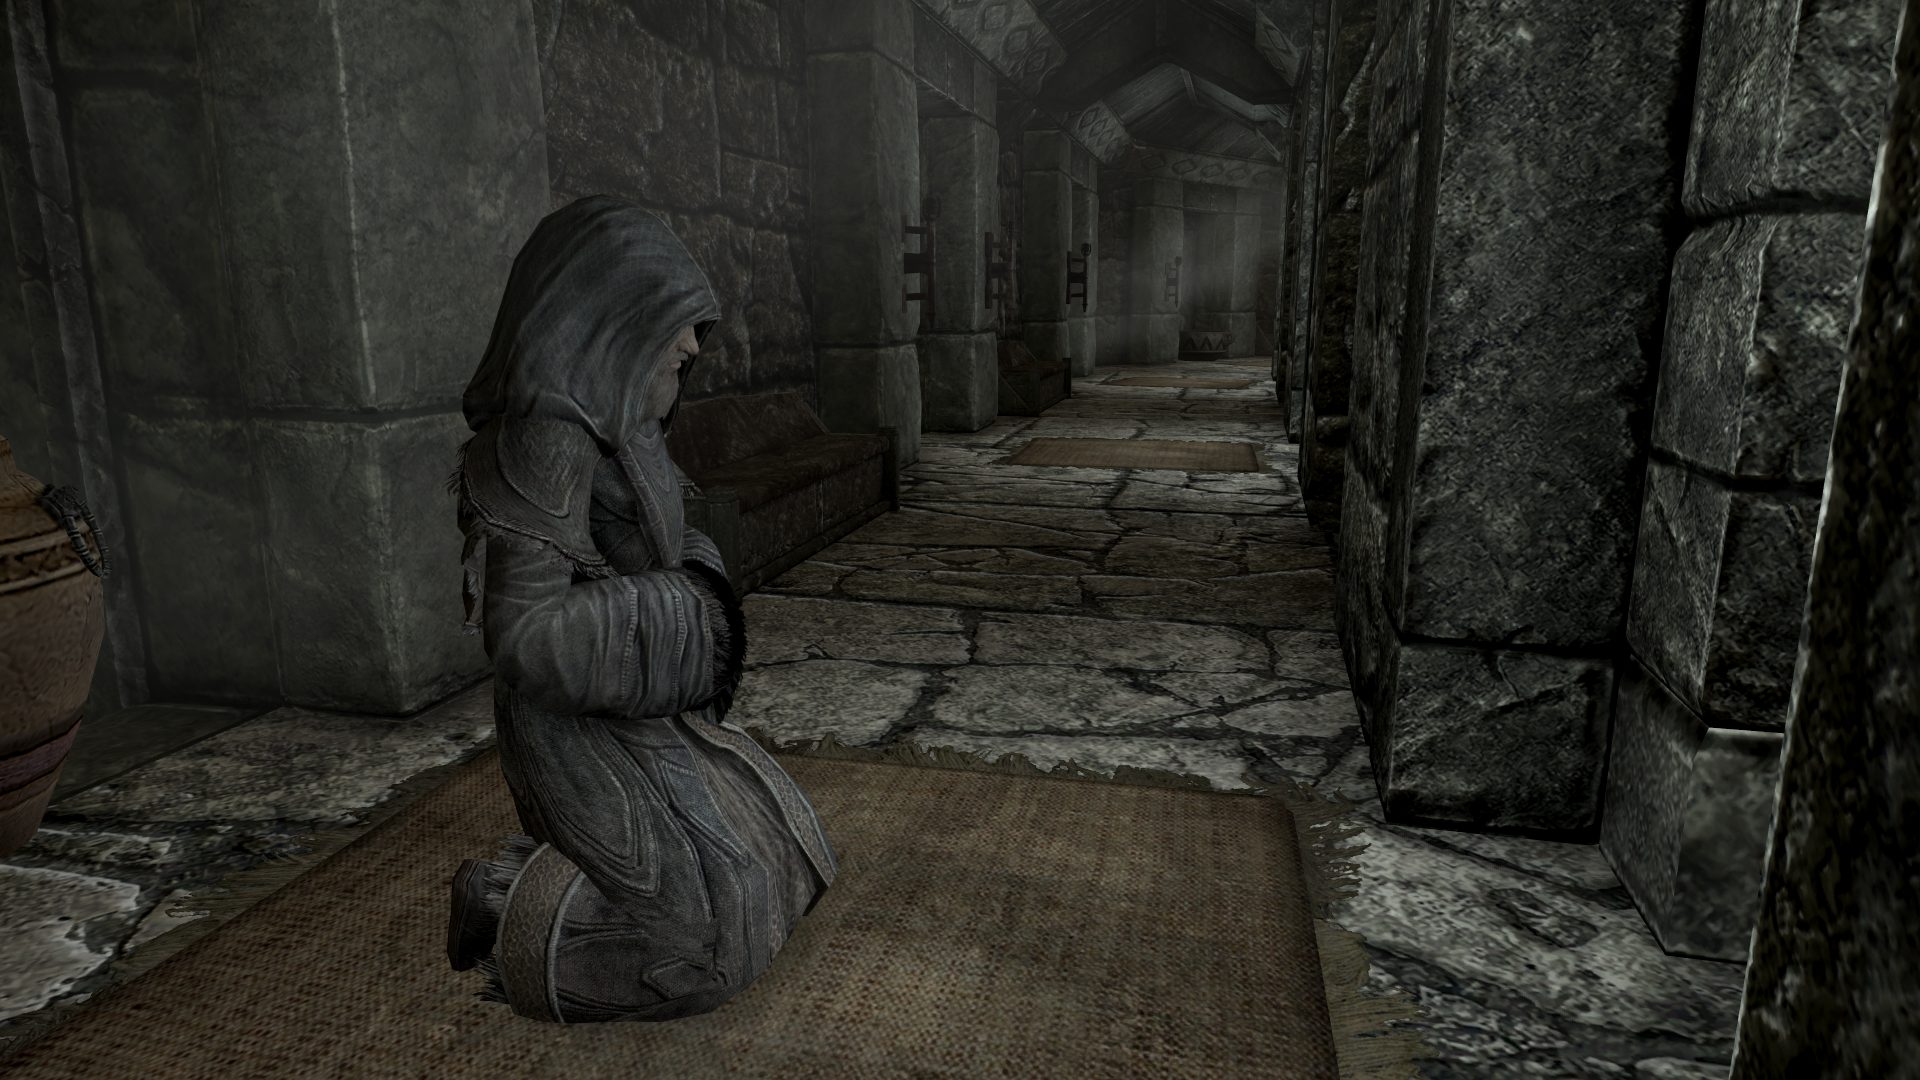 skyrim pacifist guide meditating title image